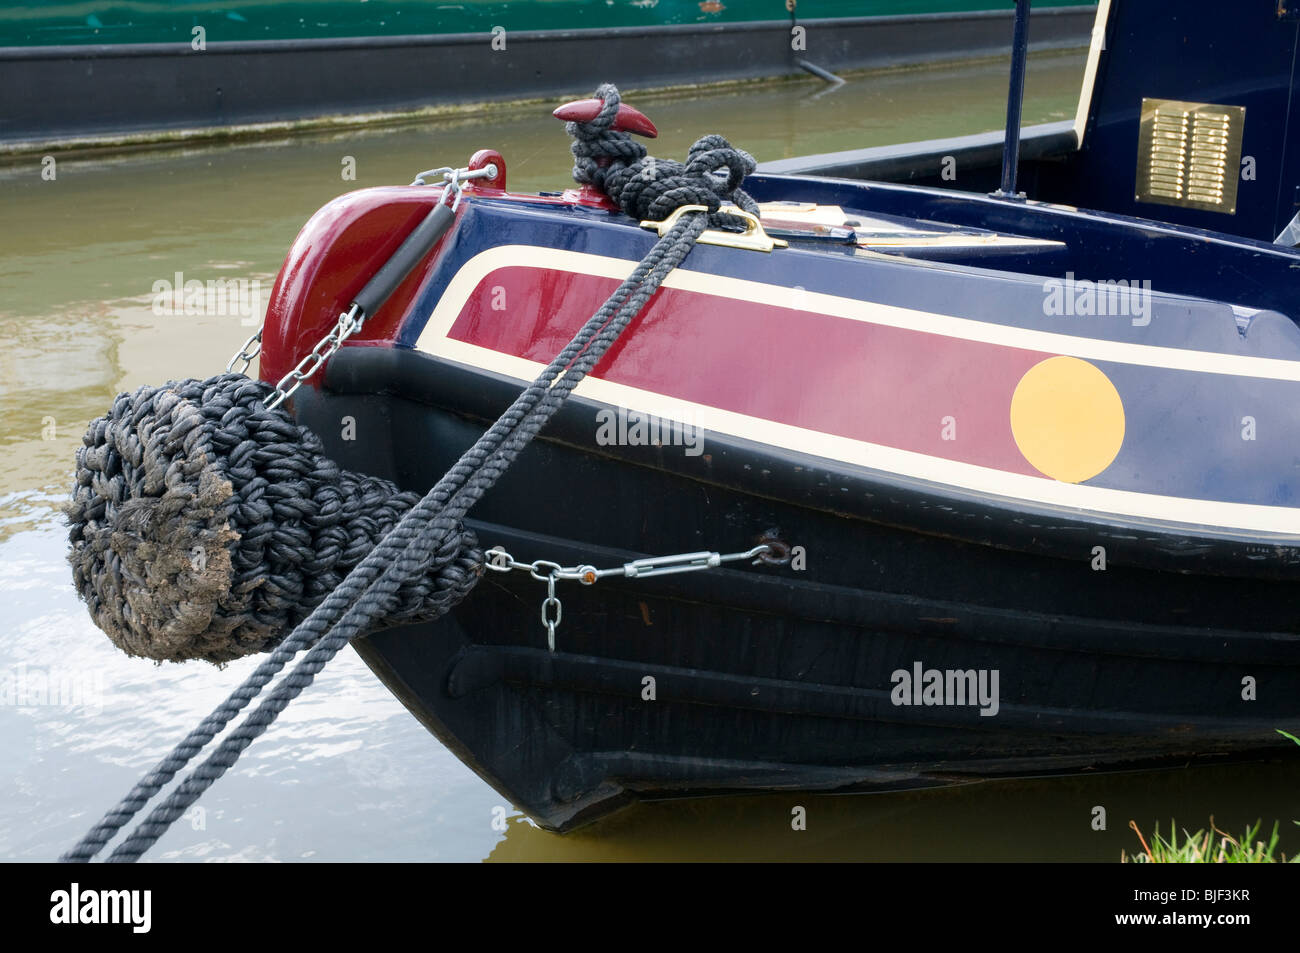 Narrowboat bow details with mooring ropes and fresh paint Stock Photo